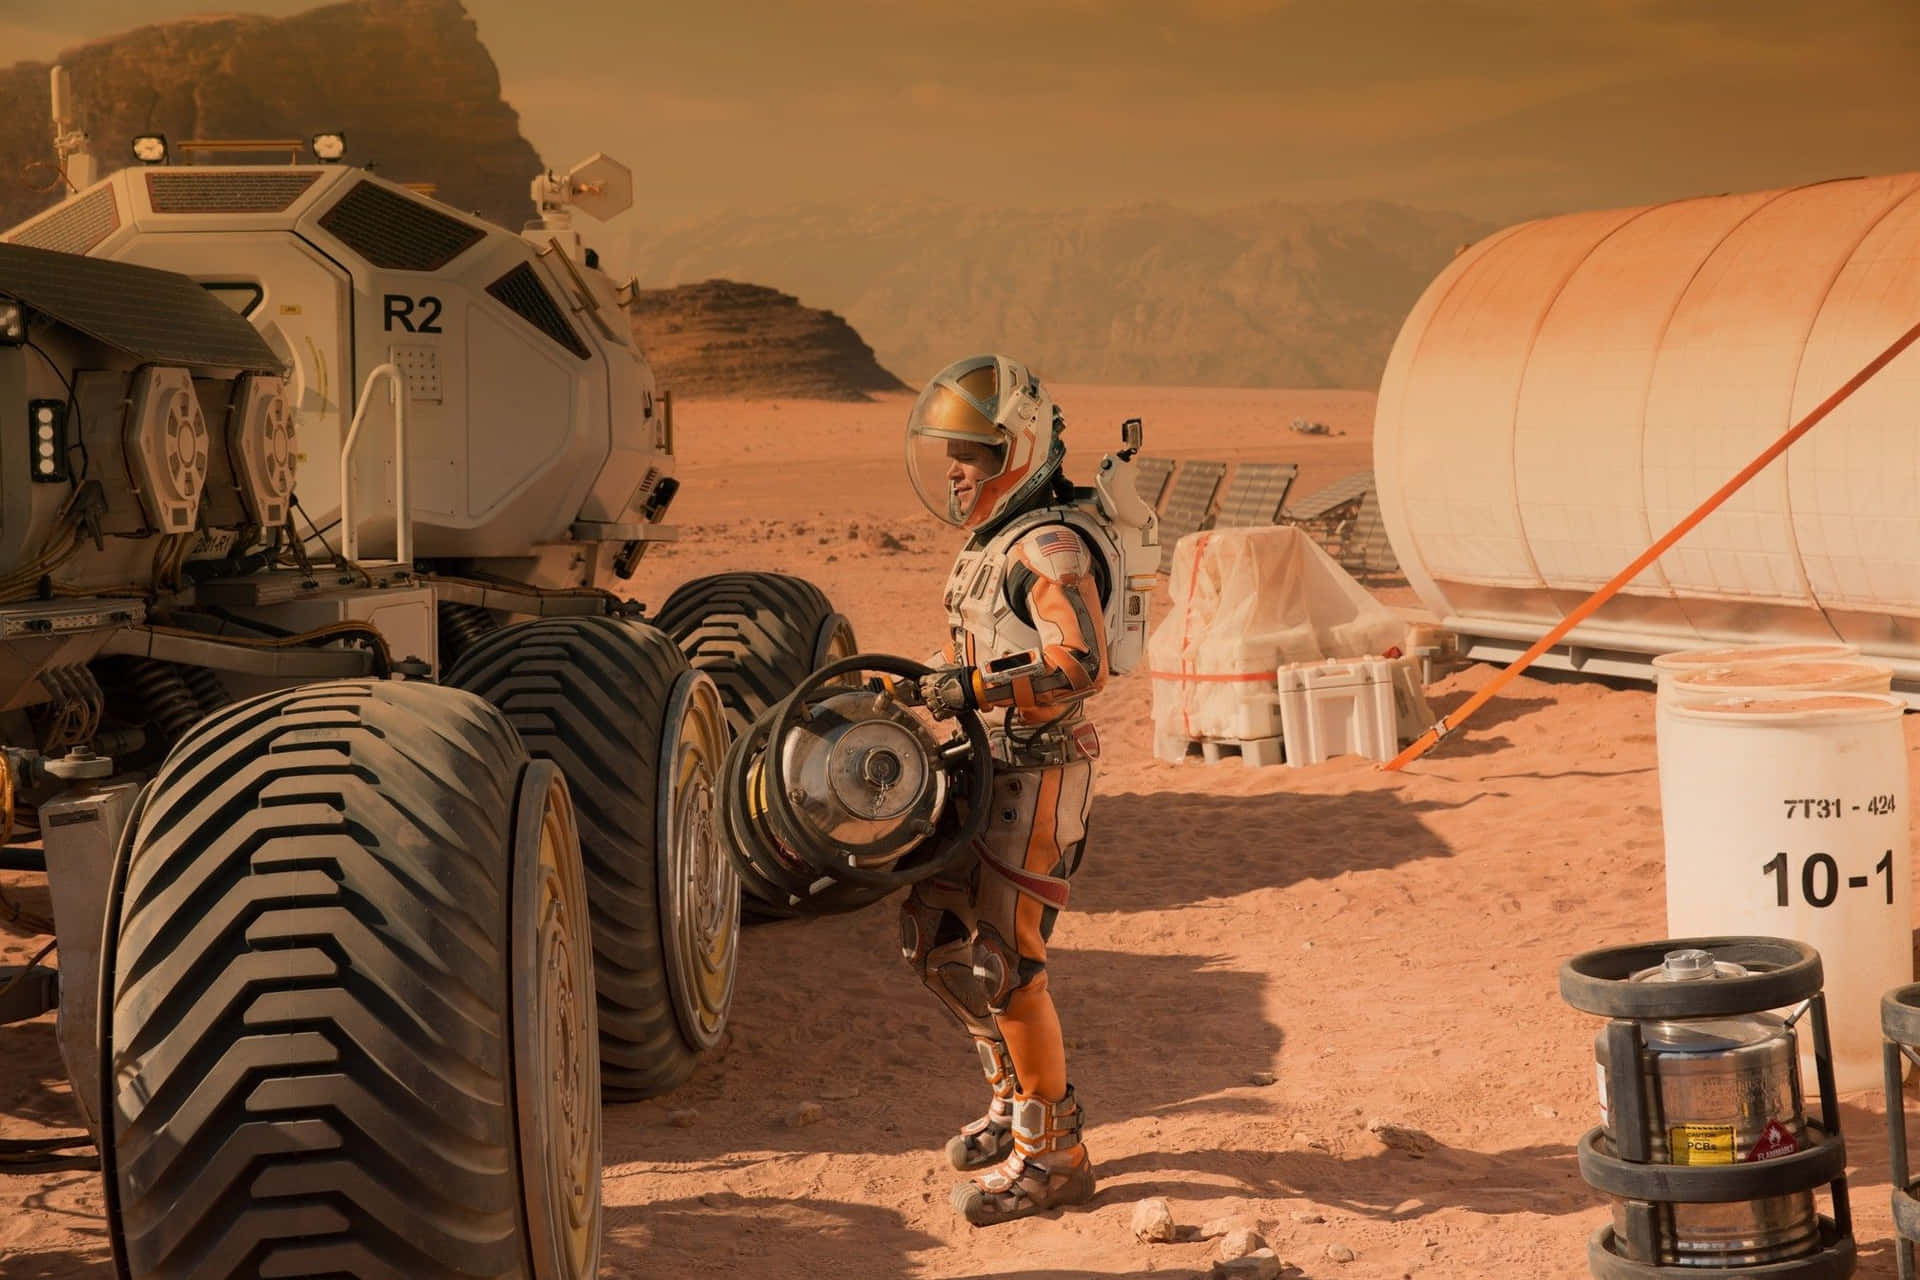 Astronaut Mark Watney Confronting Mars' Environment In The Martian Background